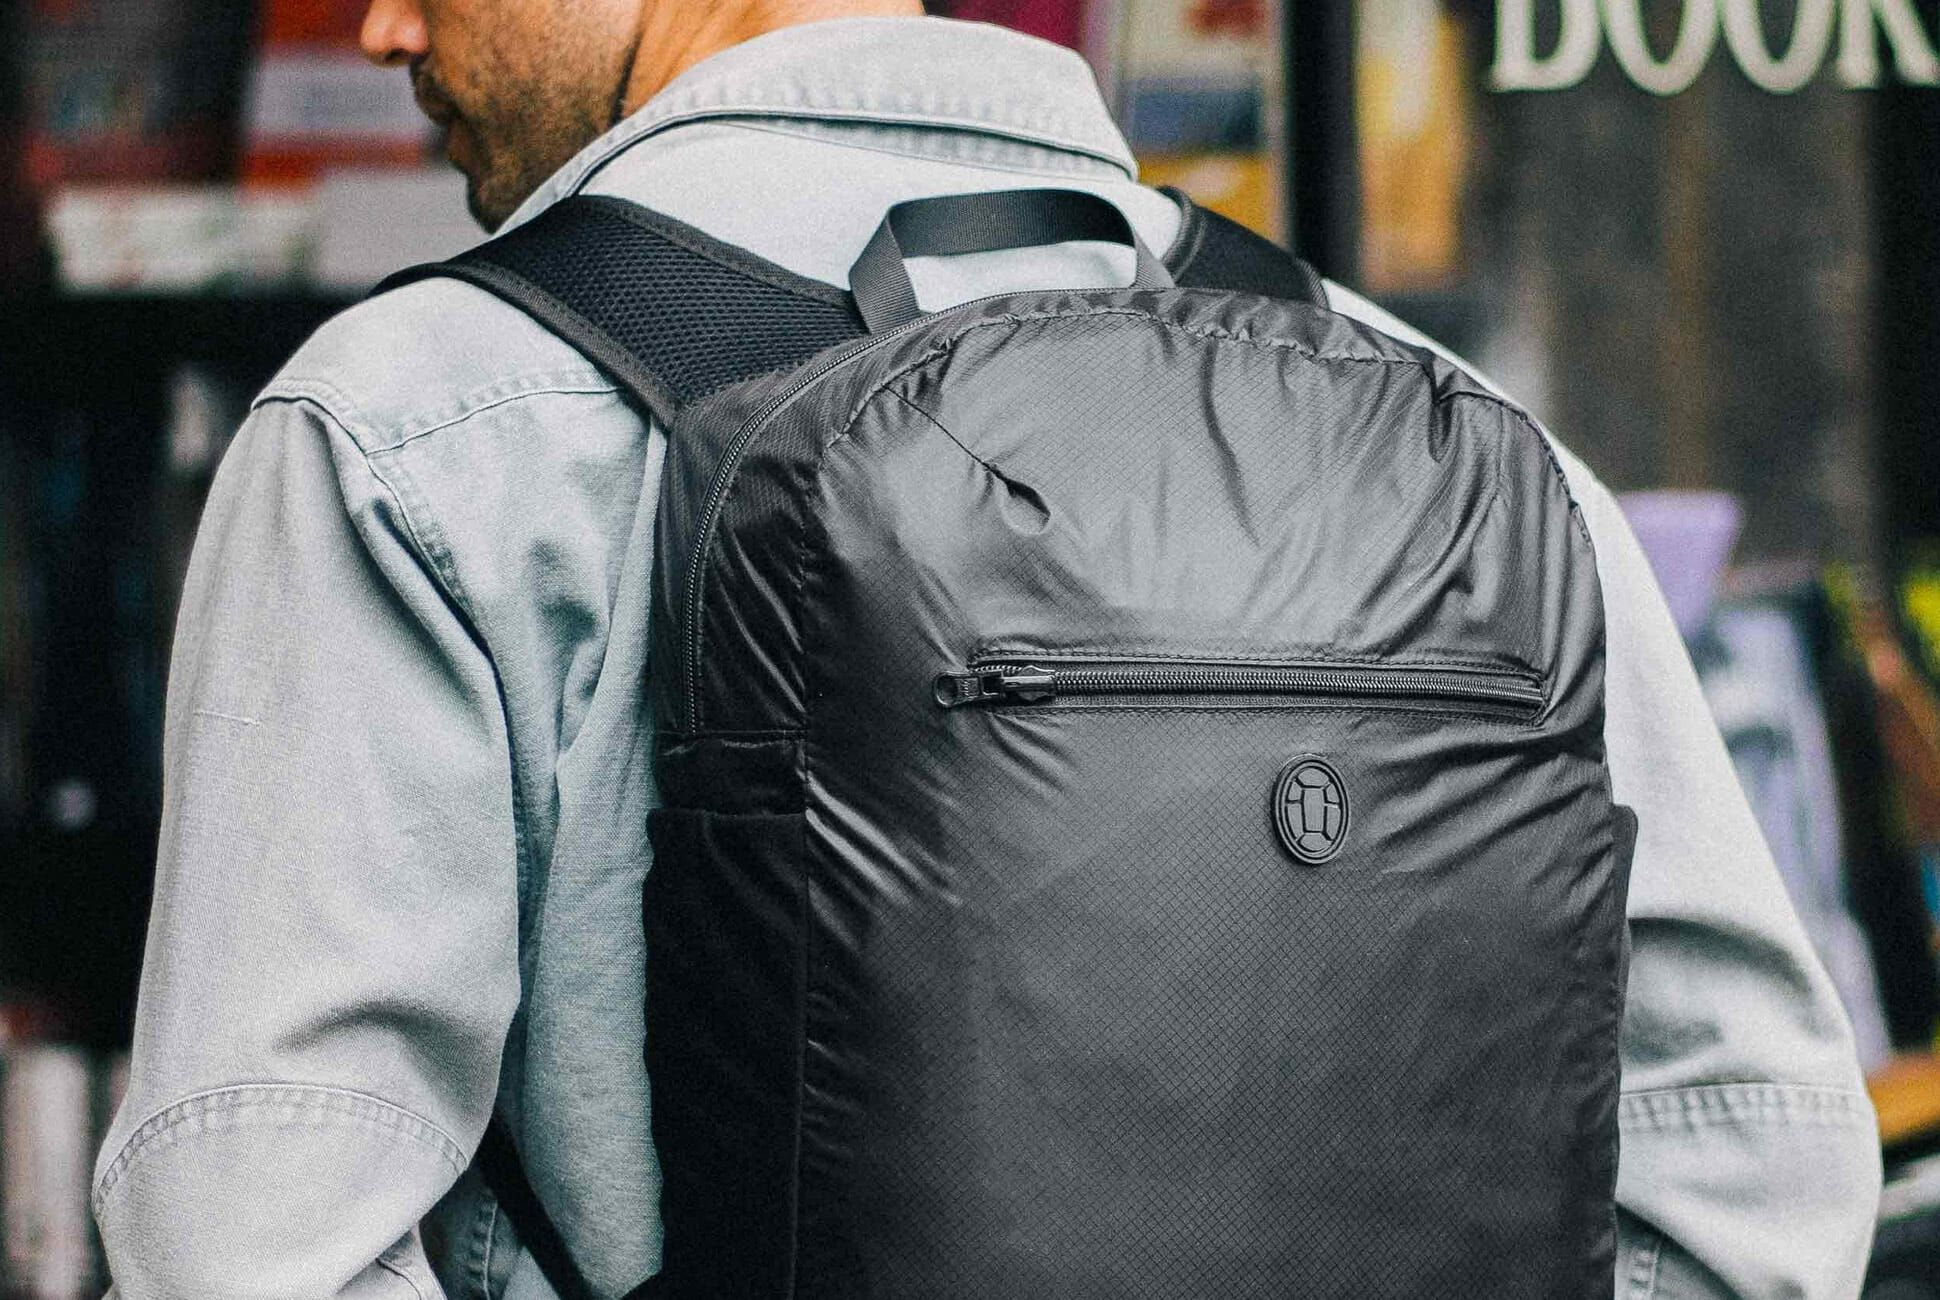 https://hips.hearstapps.com/amv-prod-gp.s3.amazonaws.com/gearpatrol/wp-content/uploads/2018/06/The-8-Best-Packable-Backpacks-for-All-Your-Extra-Stuff-gear-patrol-full-lead.jpg